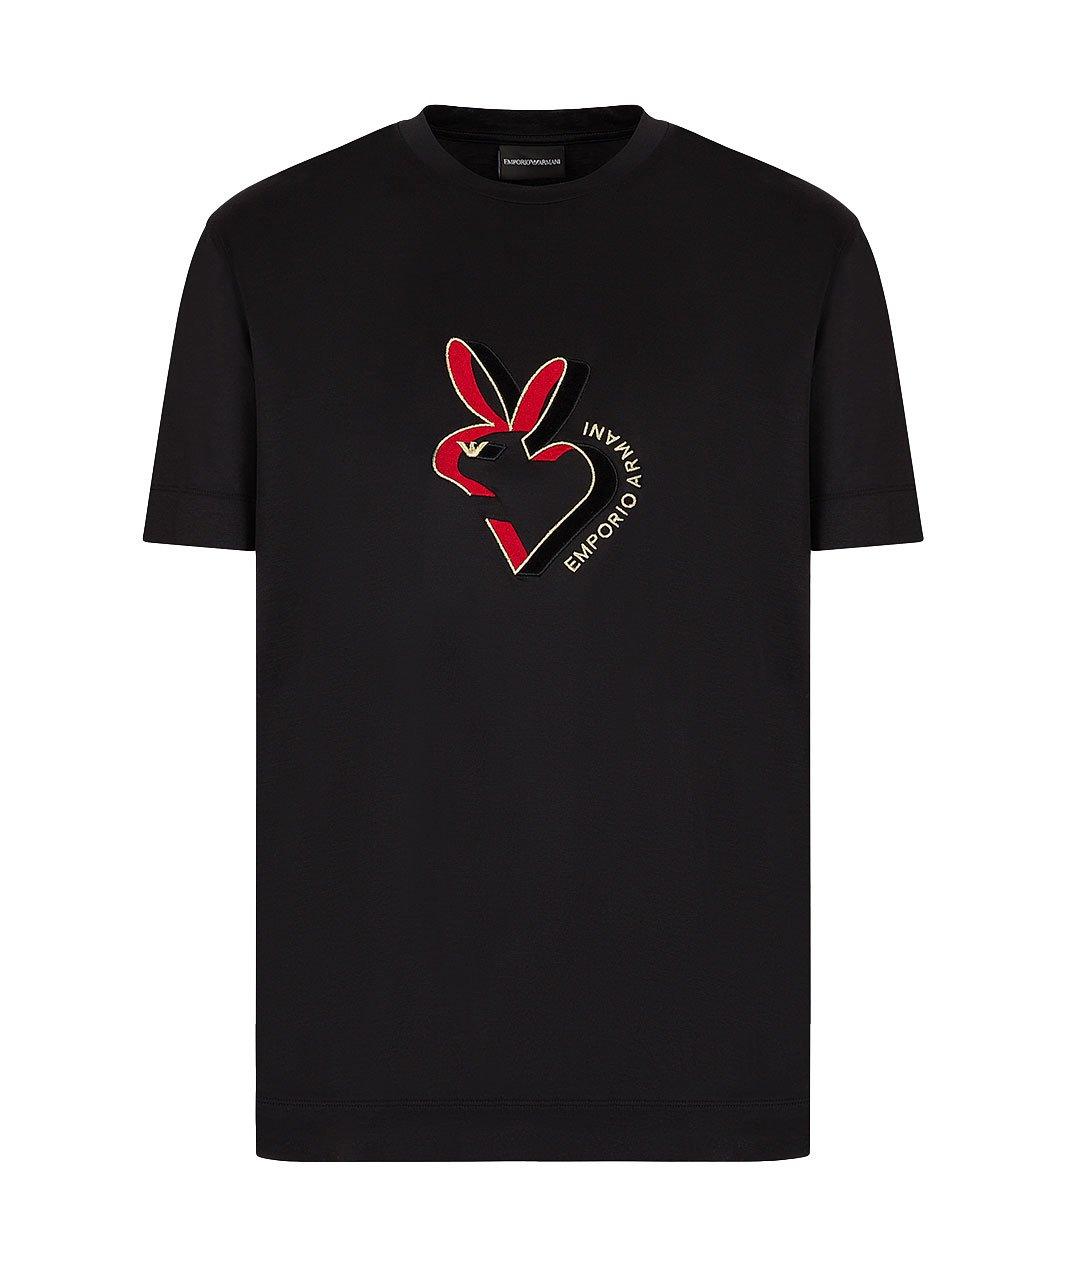 Jersey Lunar New Year Embroidery T-Shirt image 0